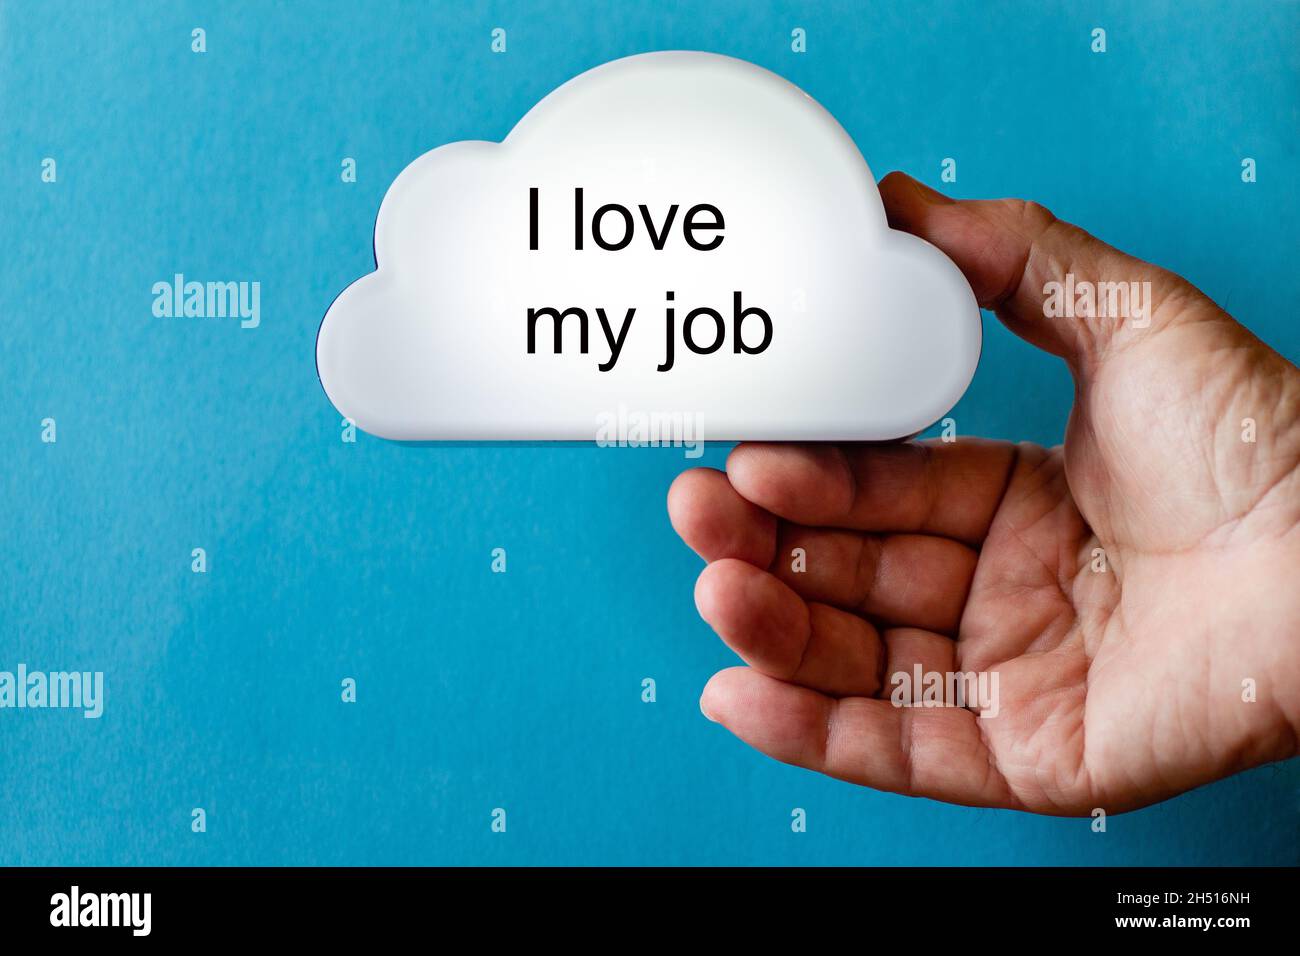 Hand holds a white cloud symbol against a blue background. The text is written on the cloud: I love my job Stock Photo